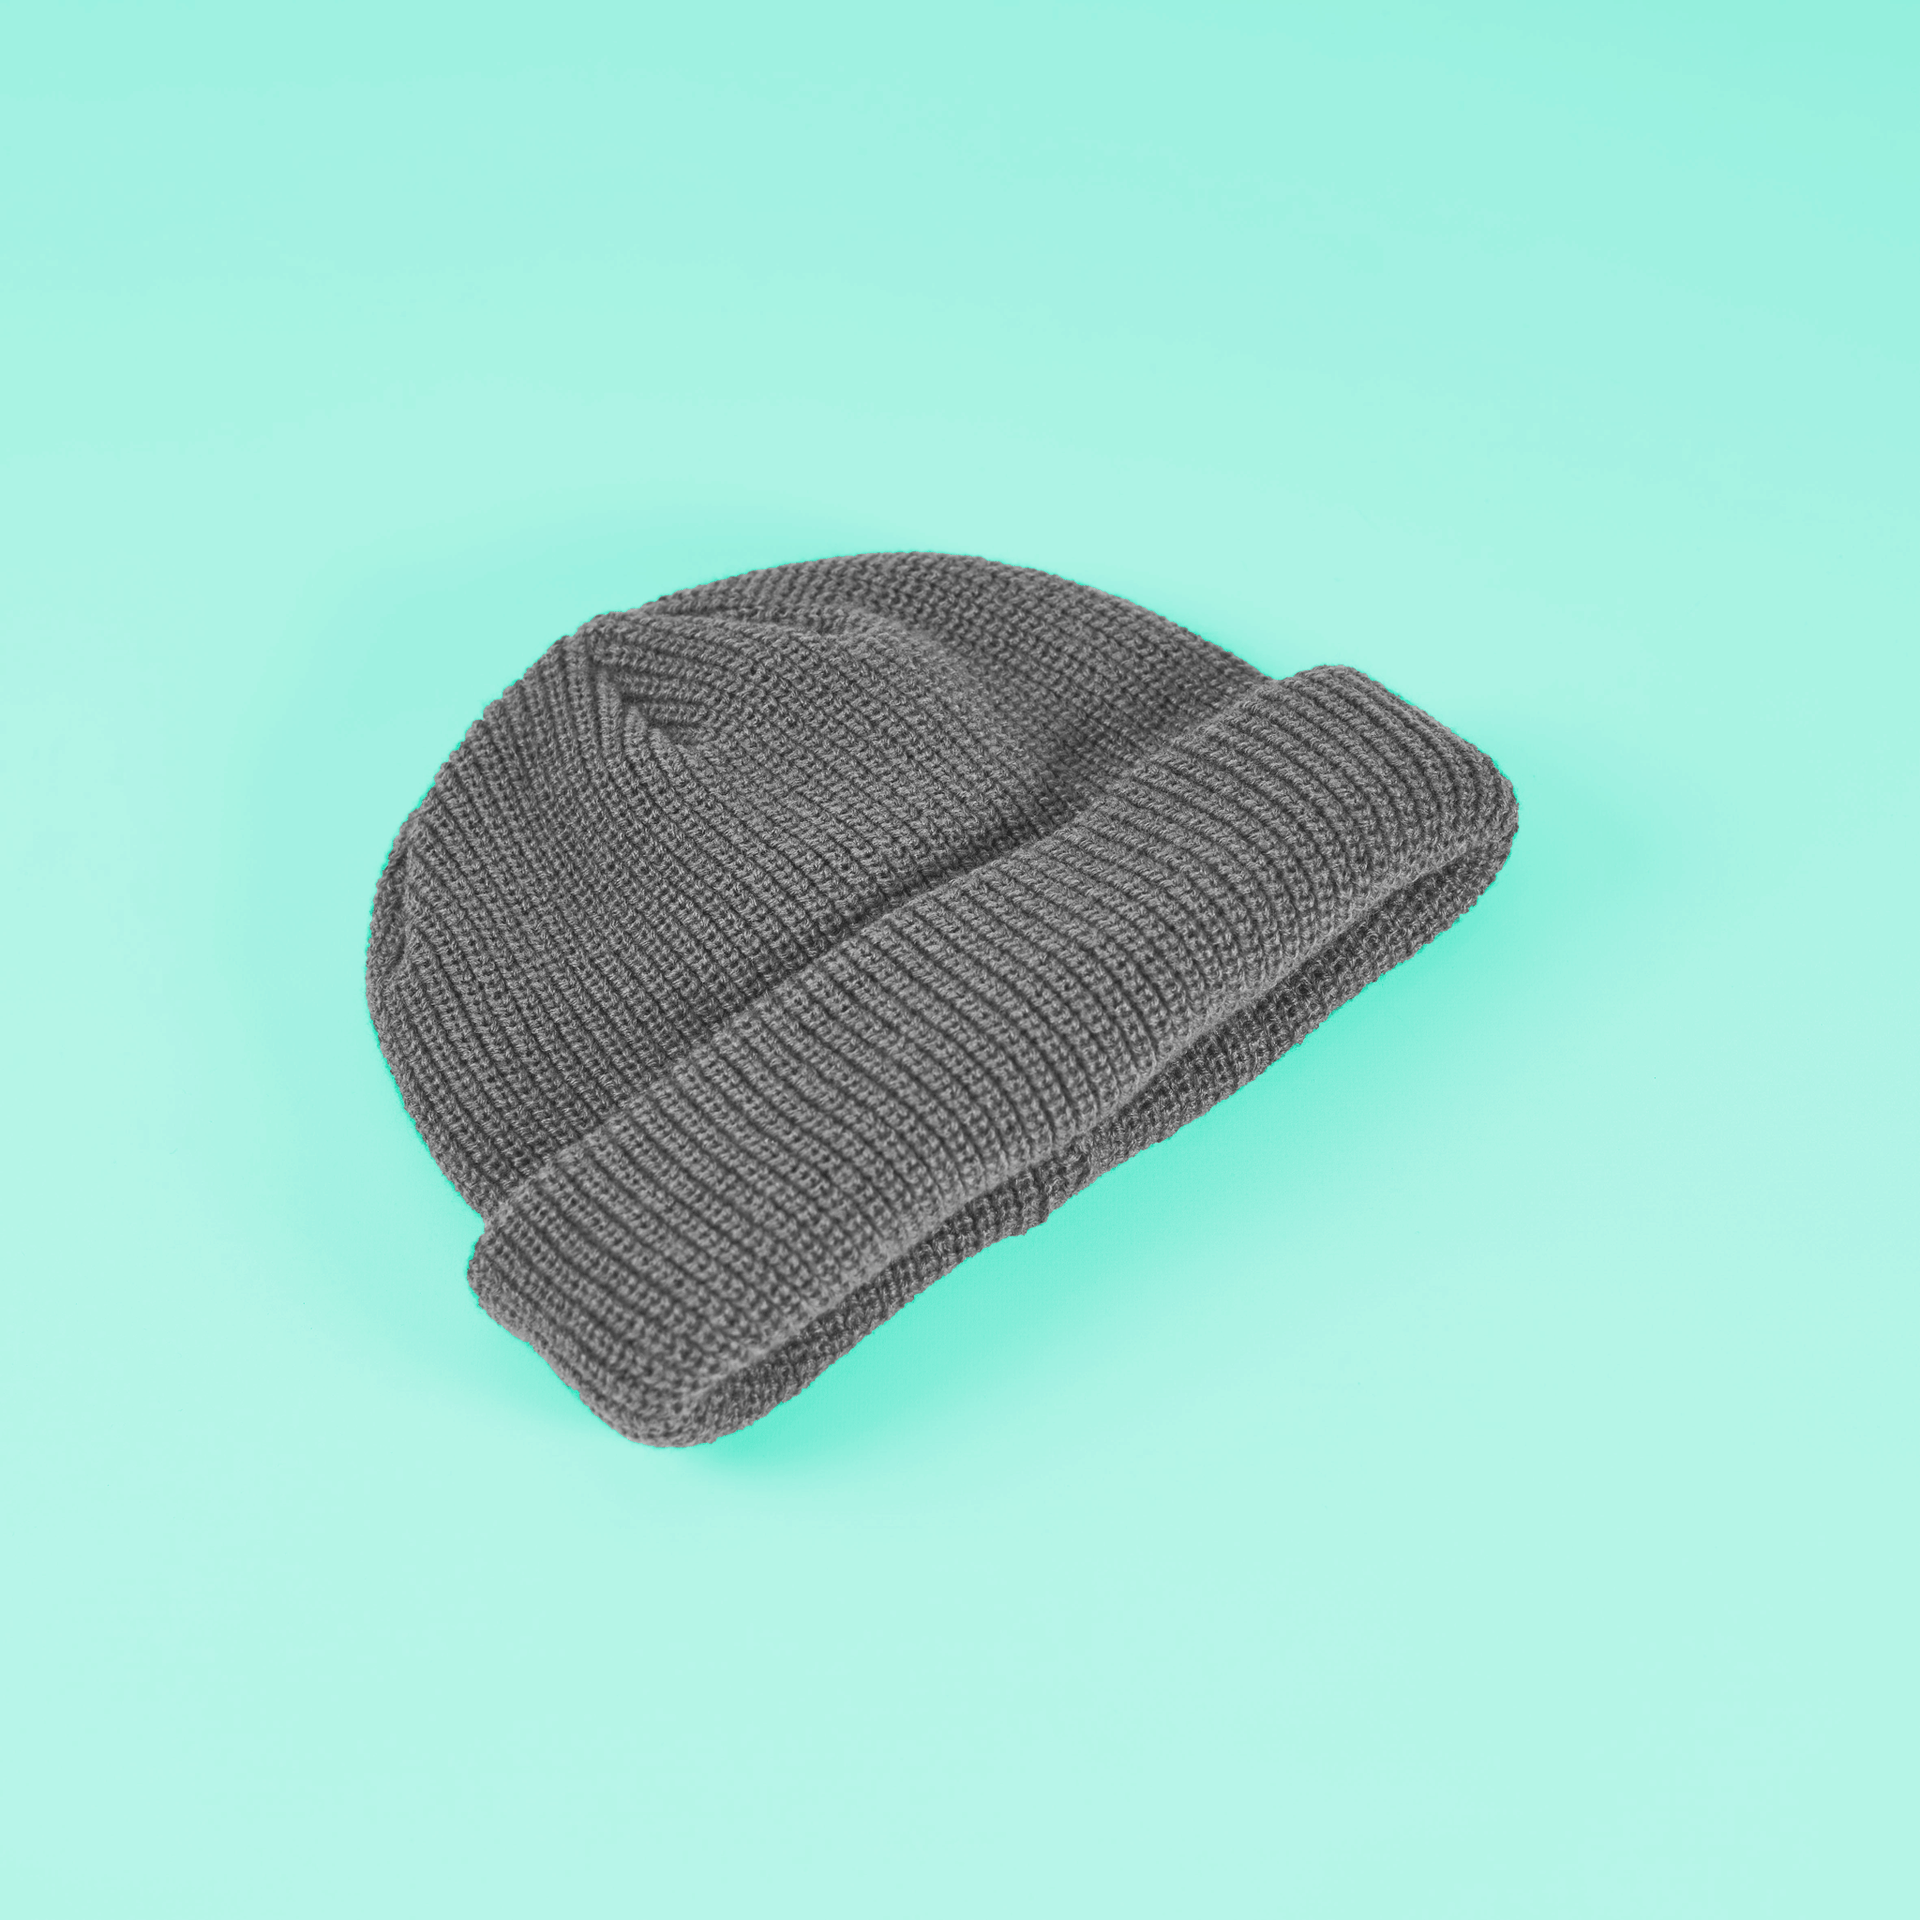 Everyday Beanie - Charcoal